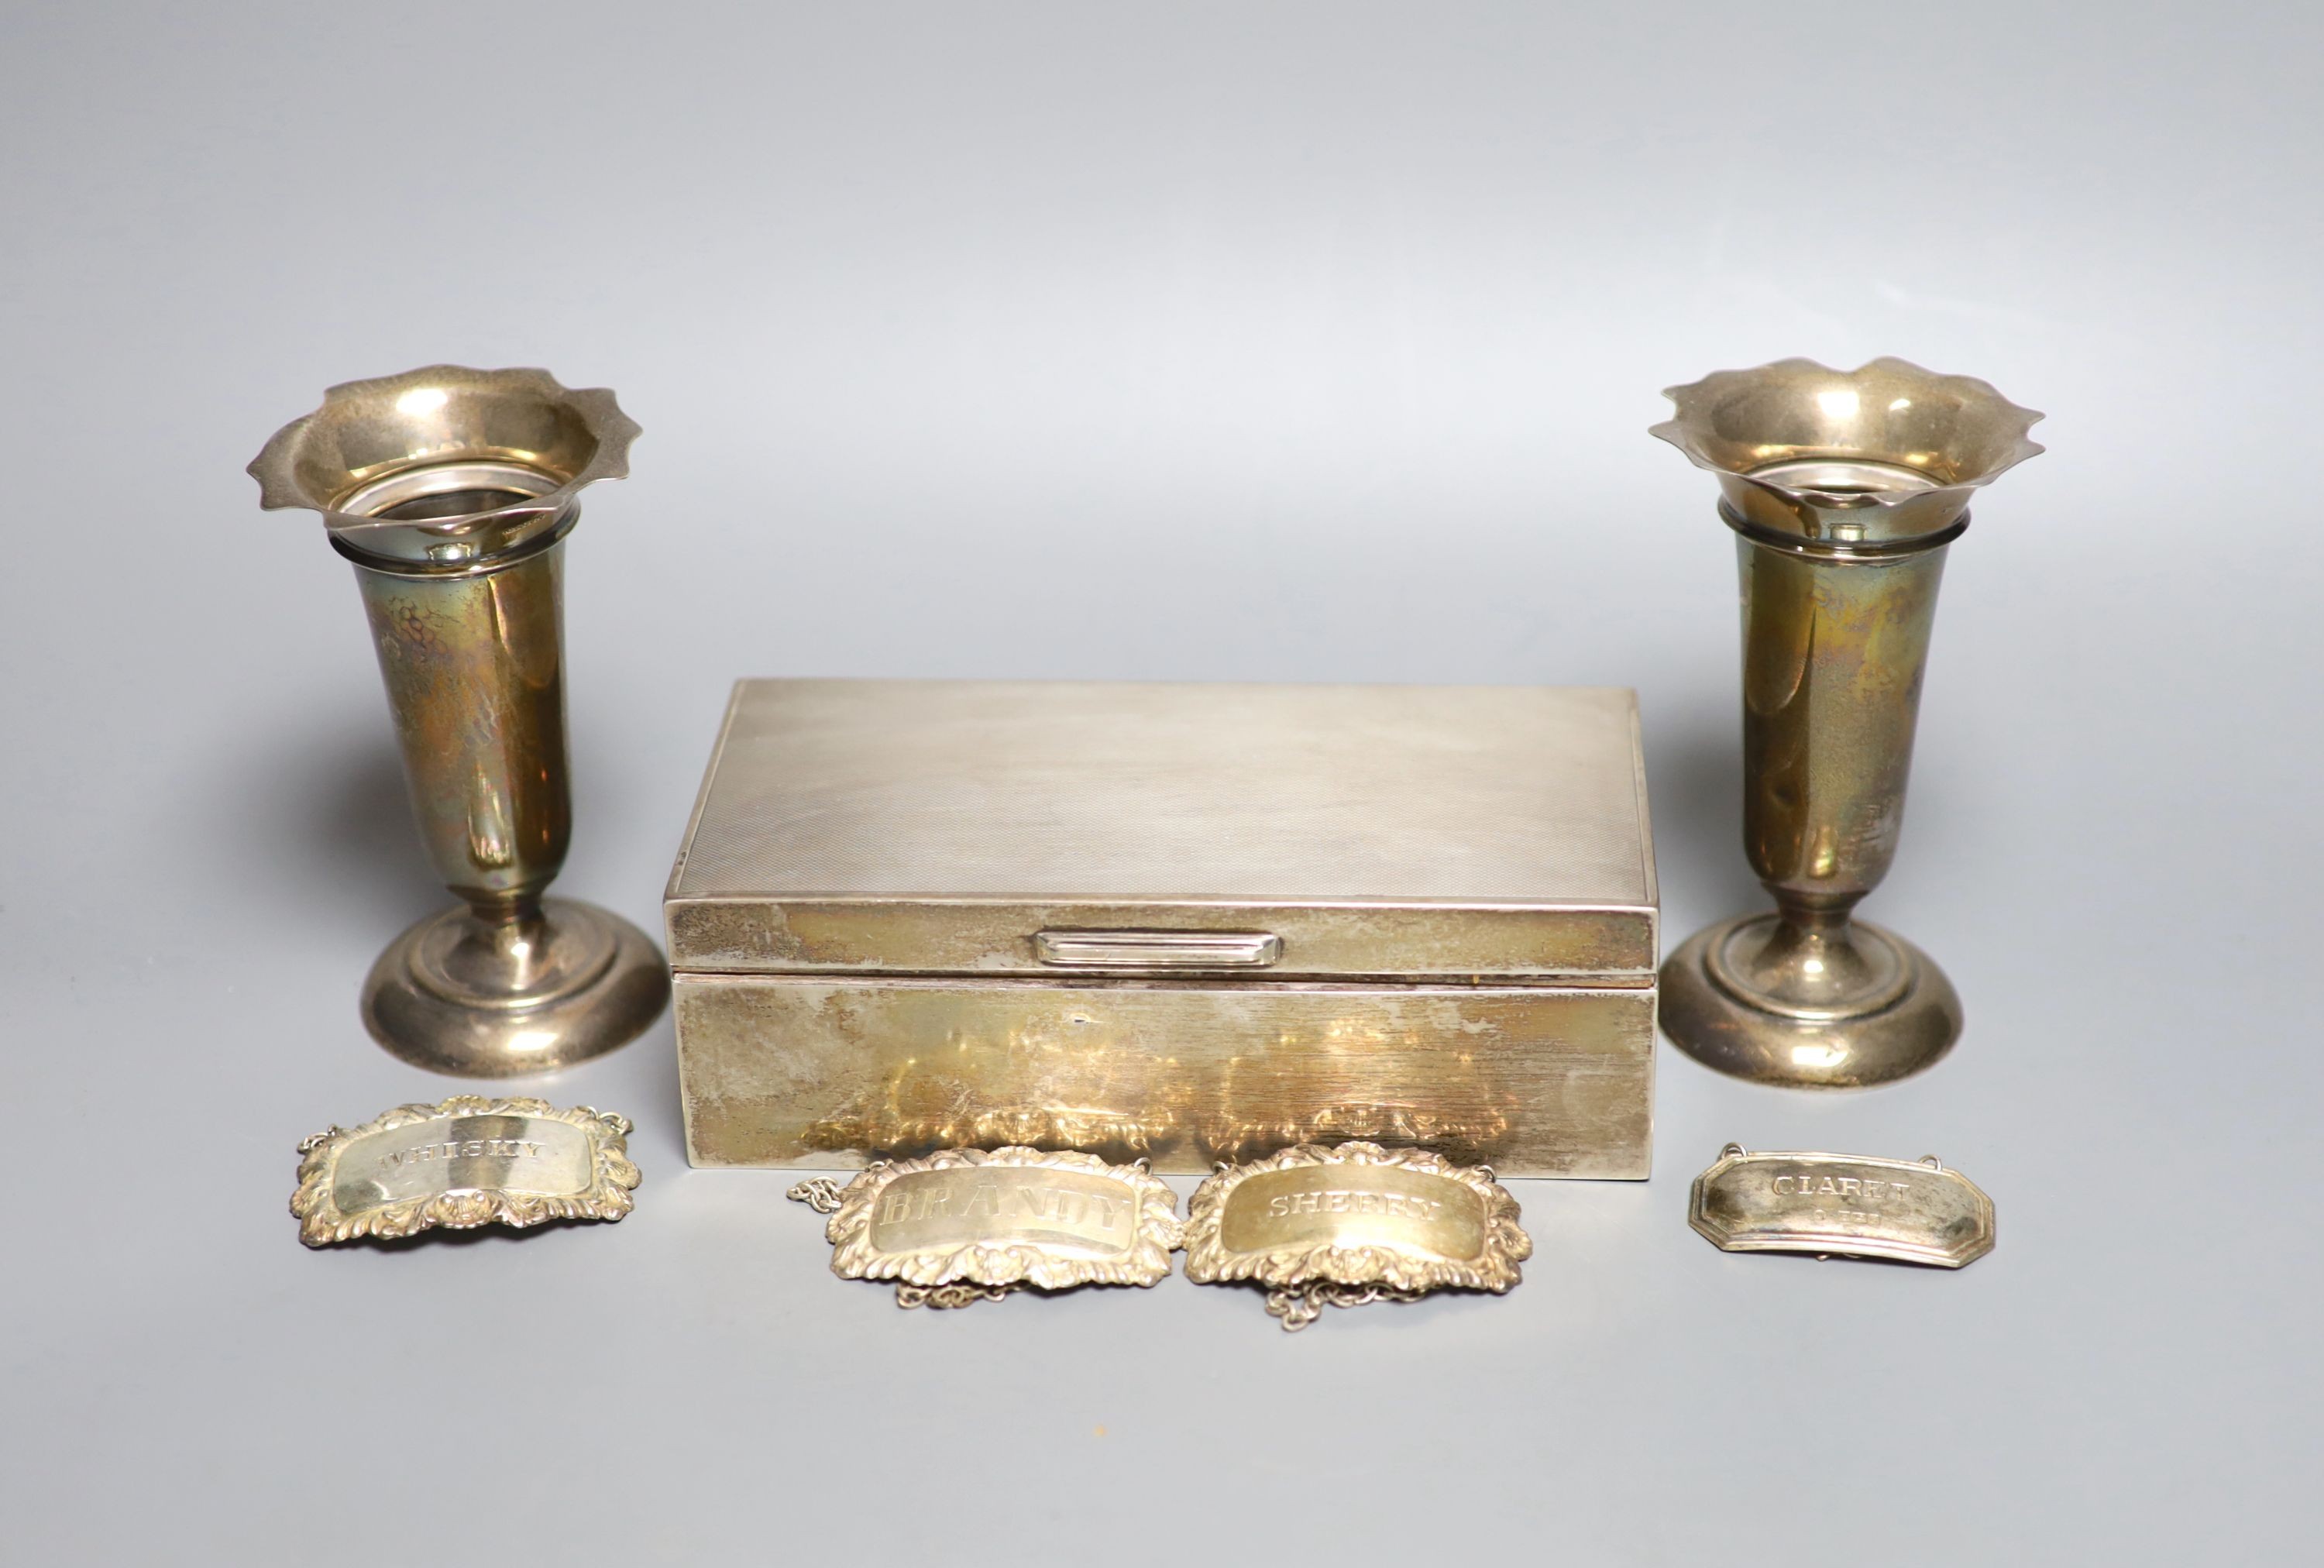 A pair of Edwardian silver vases, Birmingham, 1908, 11.1cm, weighted, four modern silver wine labels and a silver mounted cigarette box.